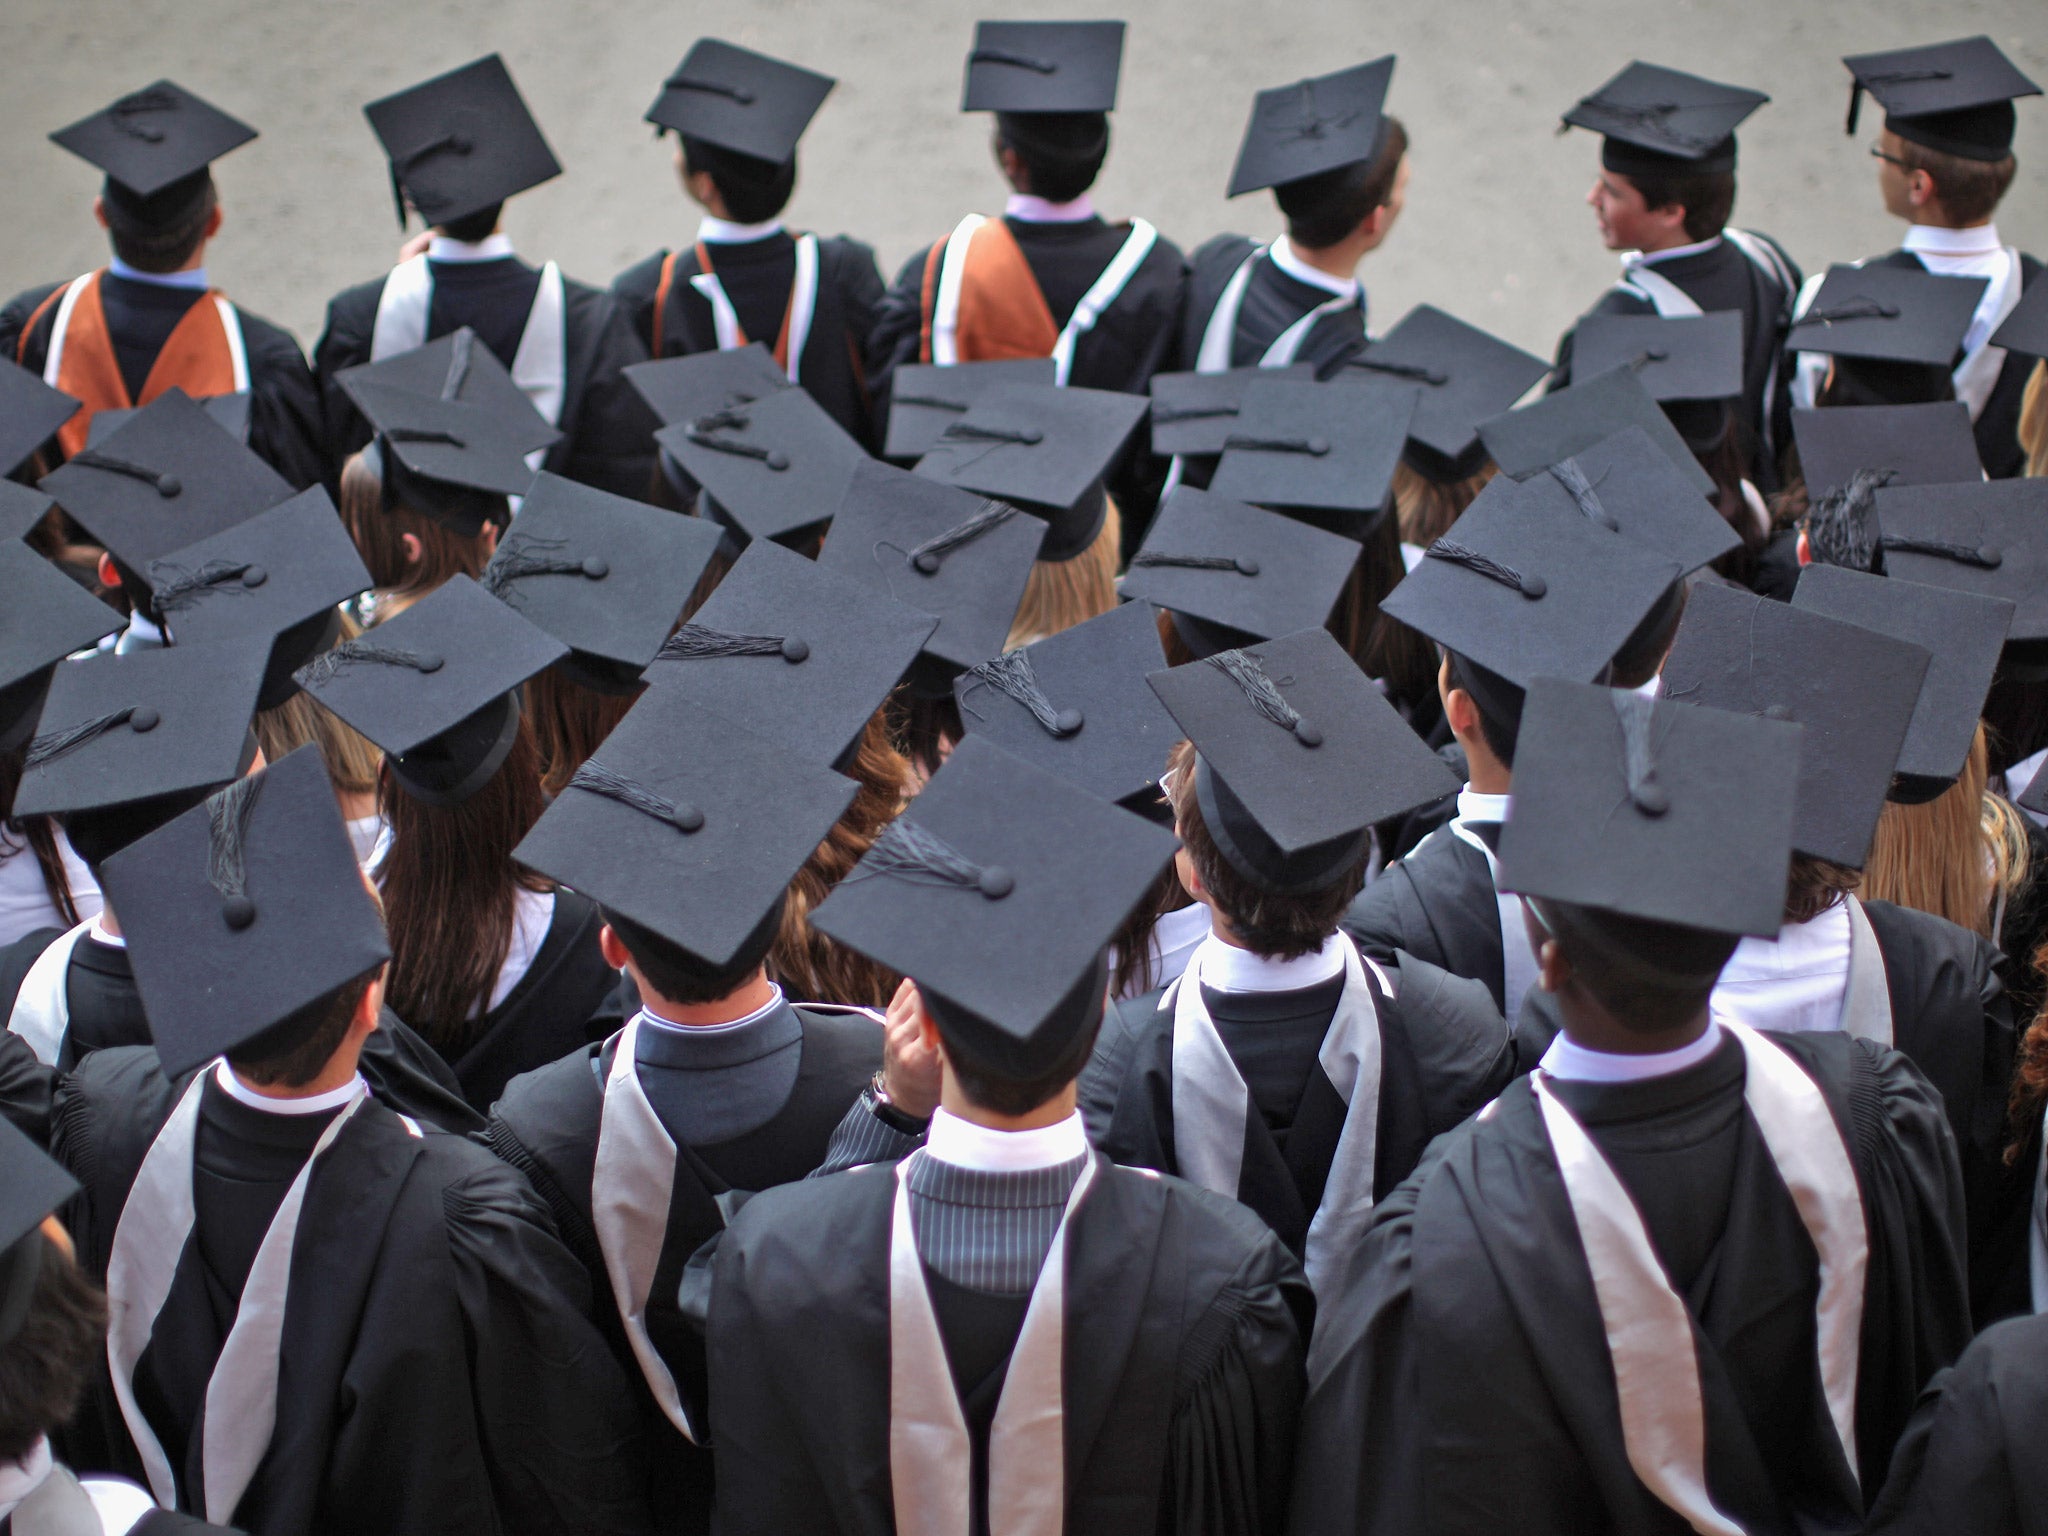 The majority of students will still be paying for their education decades after they graduate